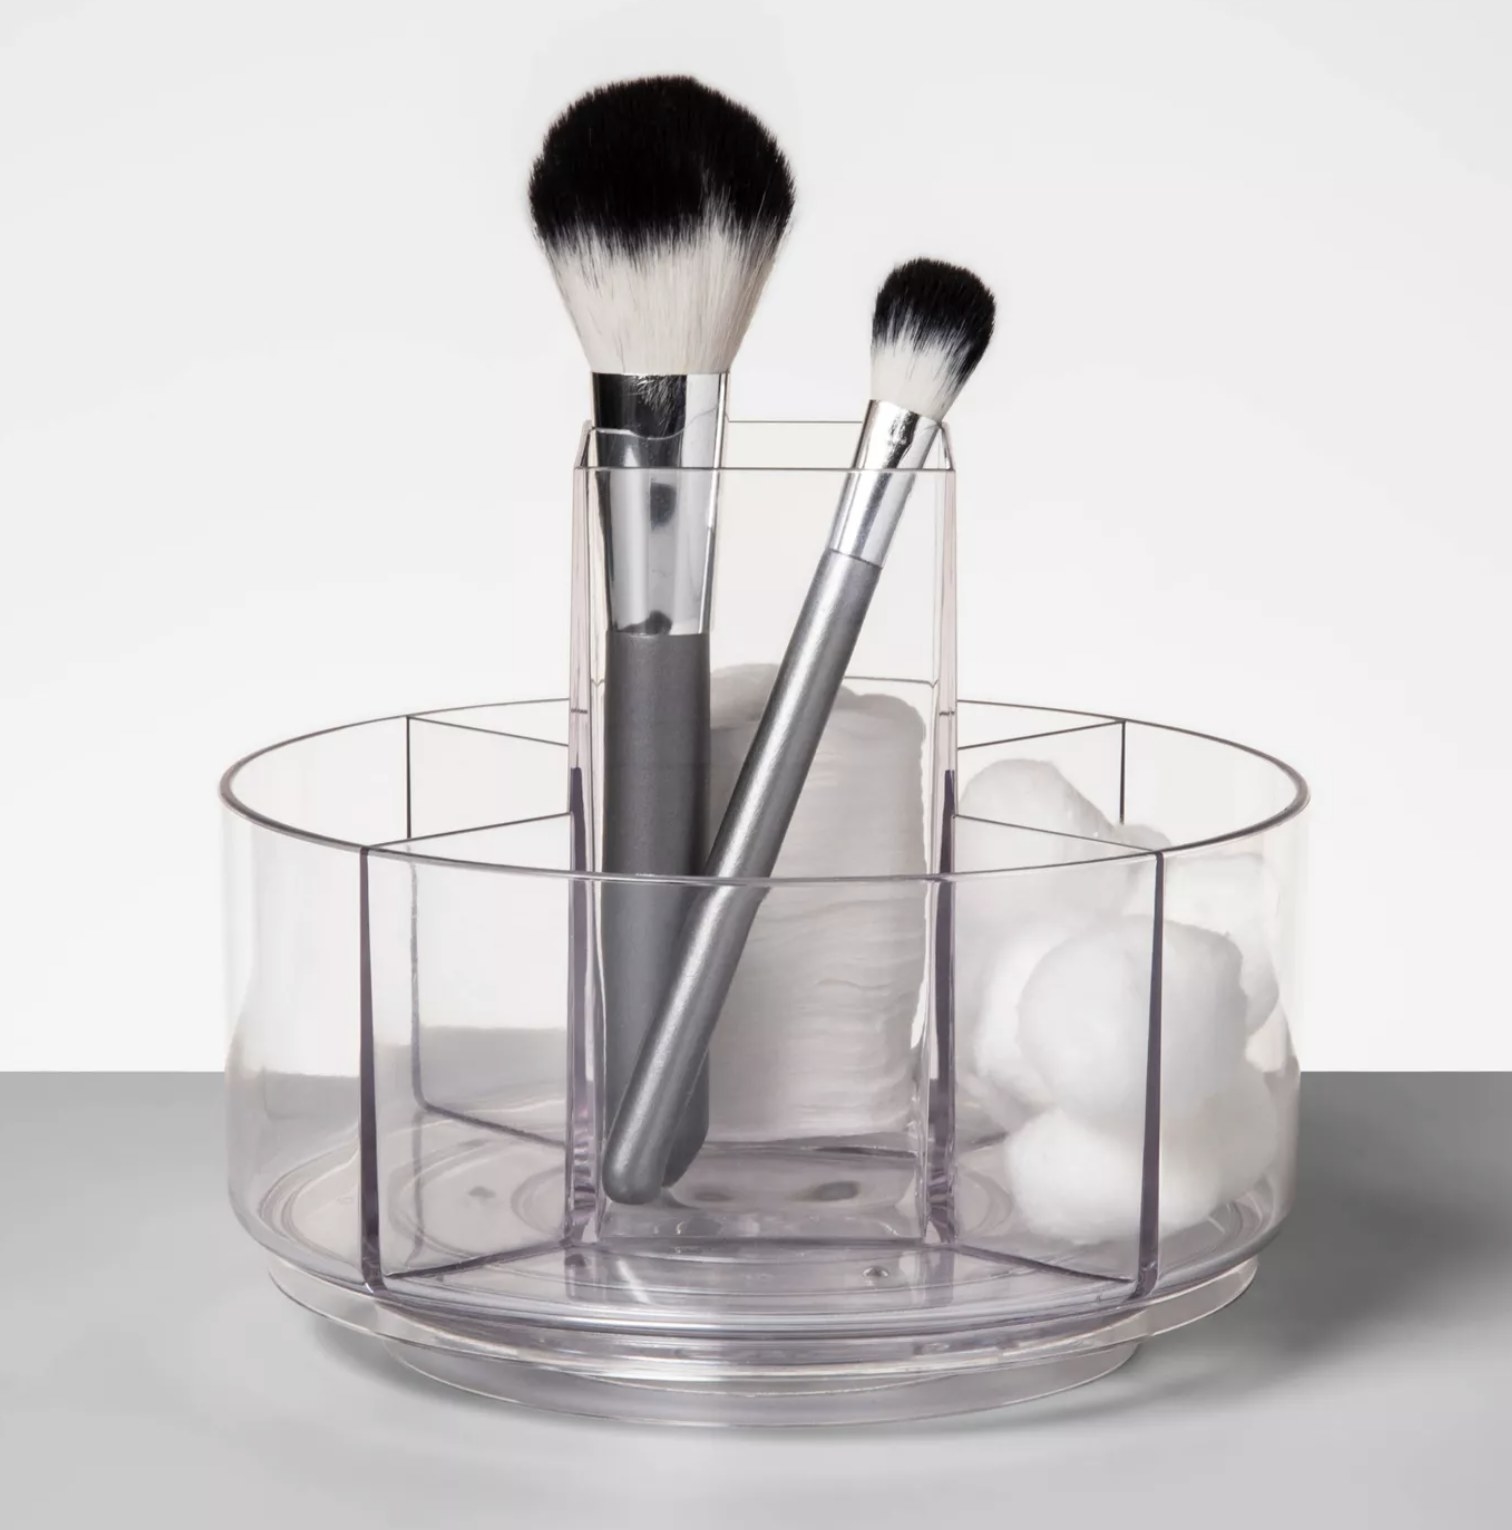 The translucent organizer with small sections for makeup tools 